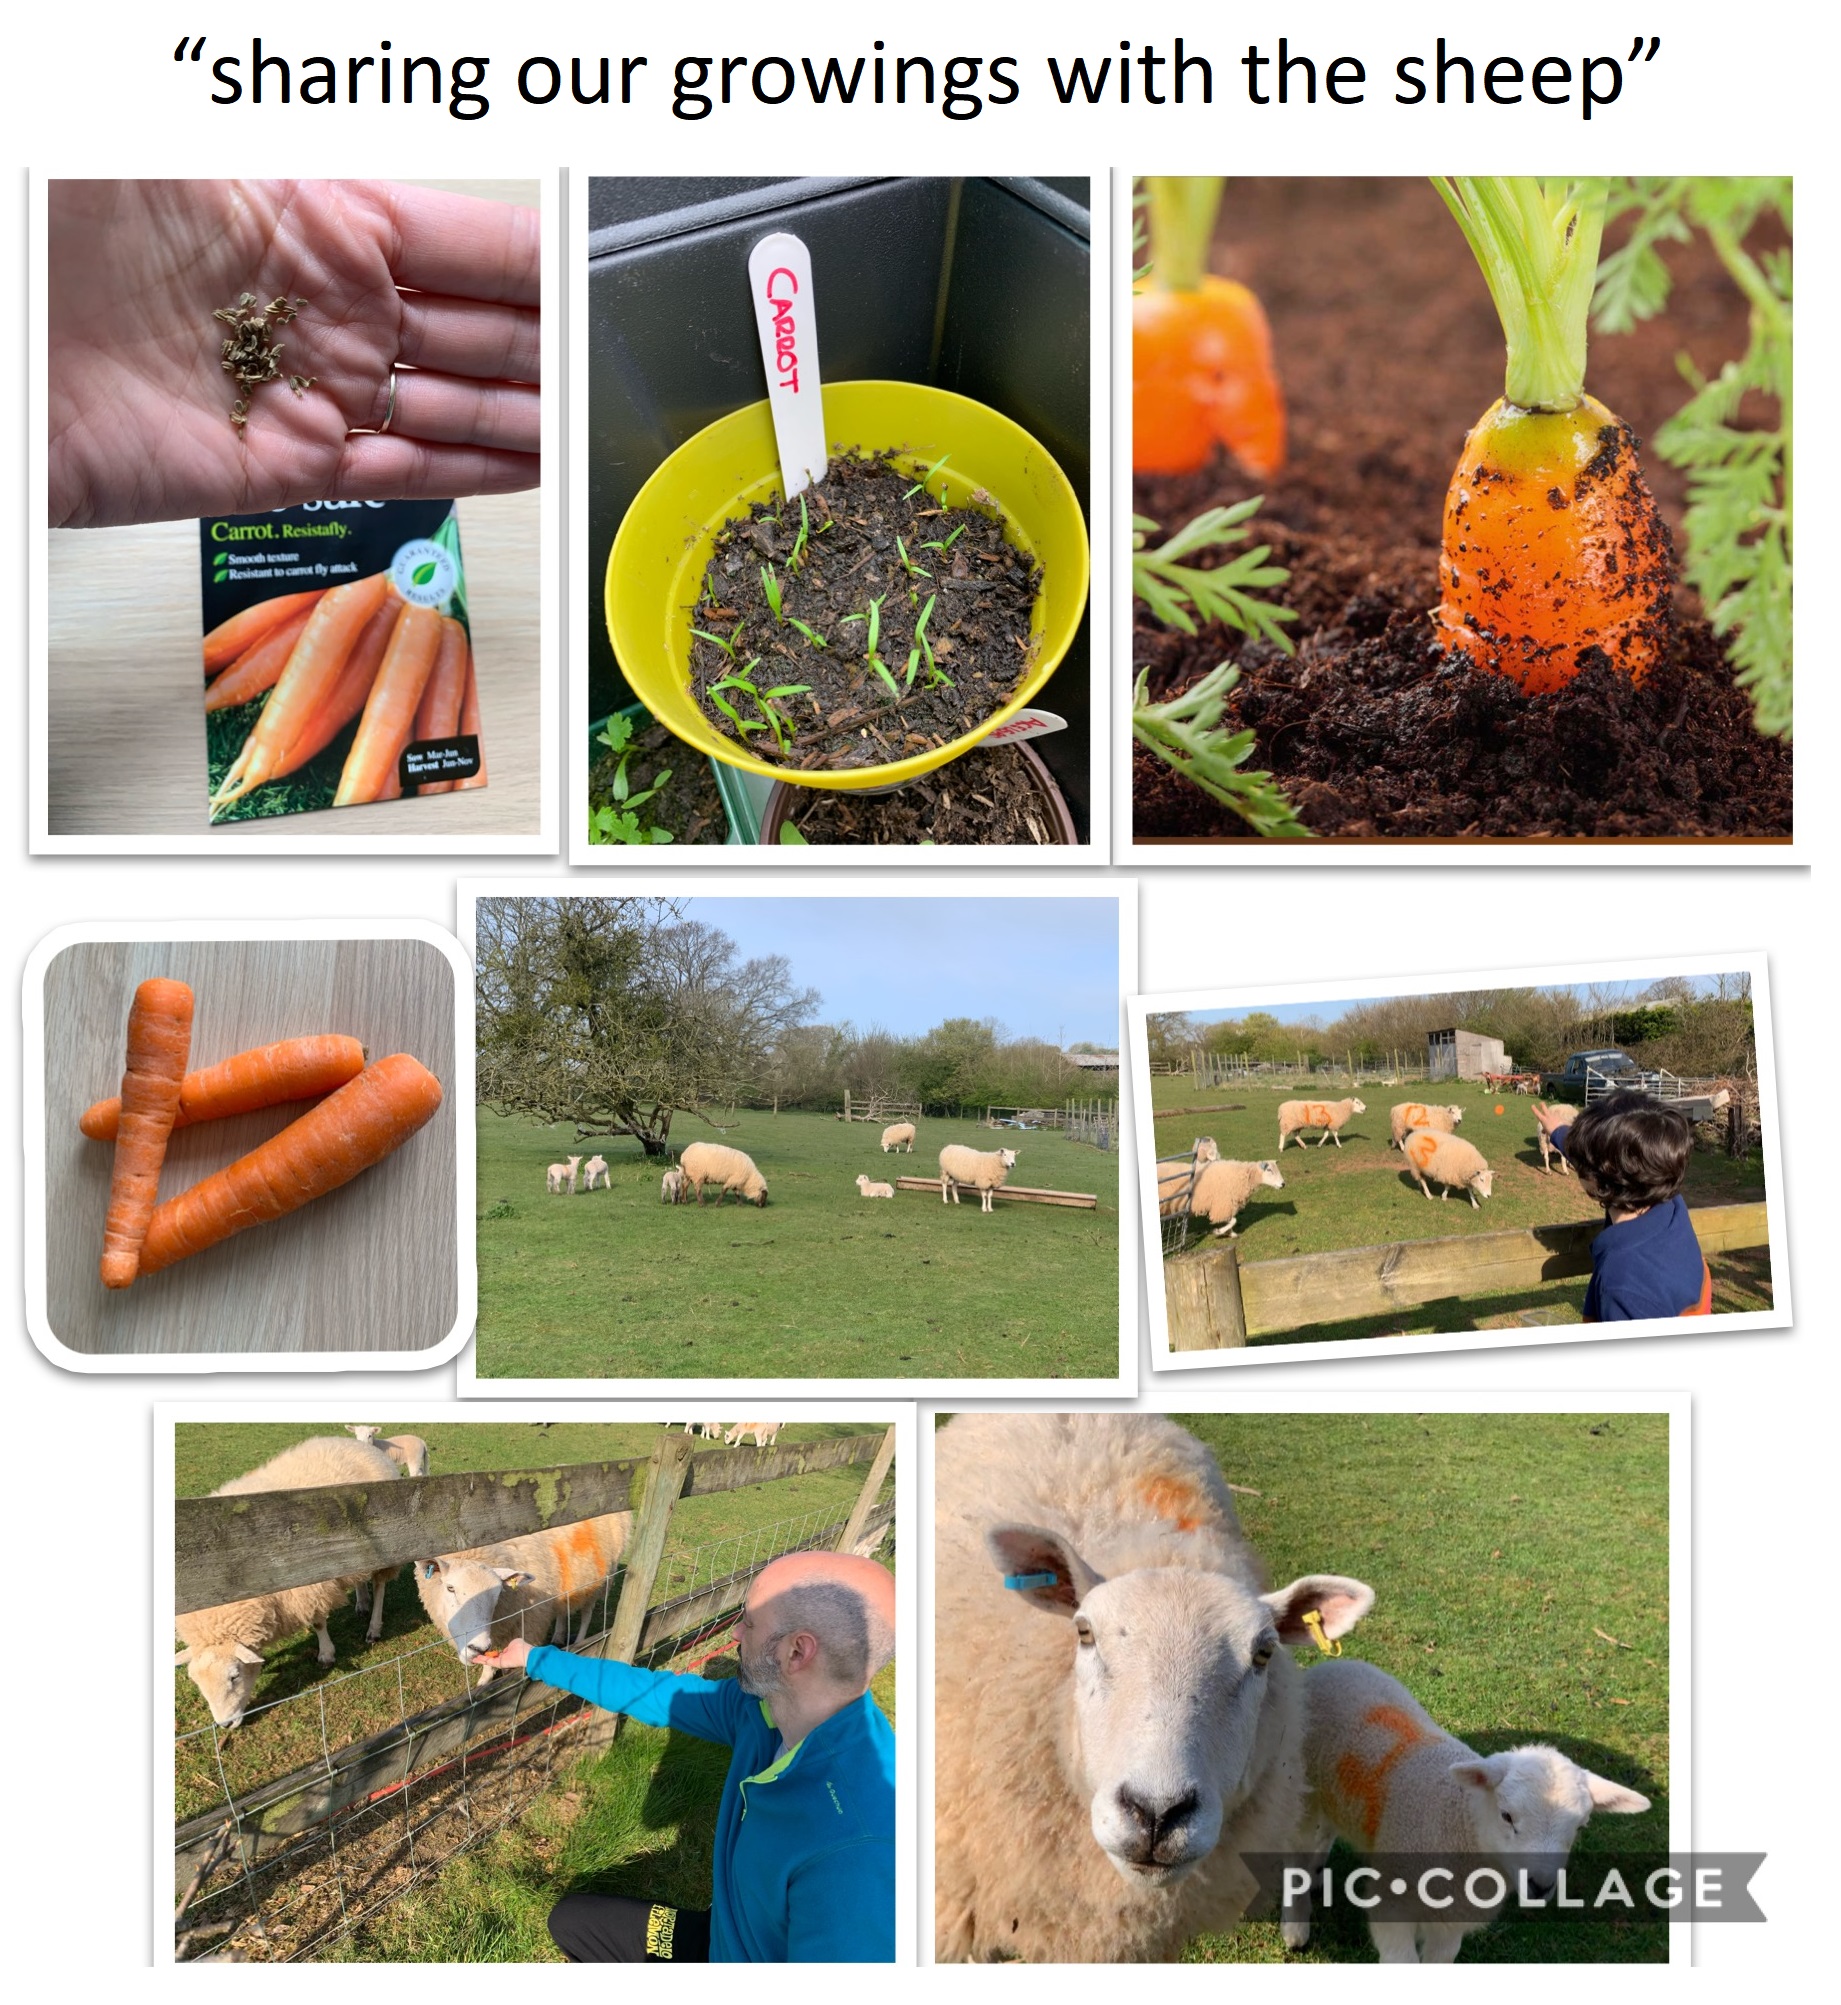 Photostory showing the growing of carrots and then feeding them to sheep